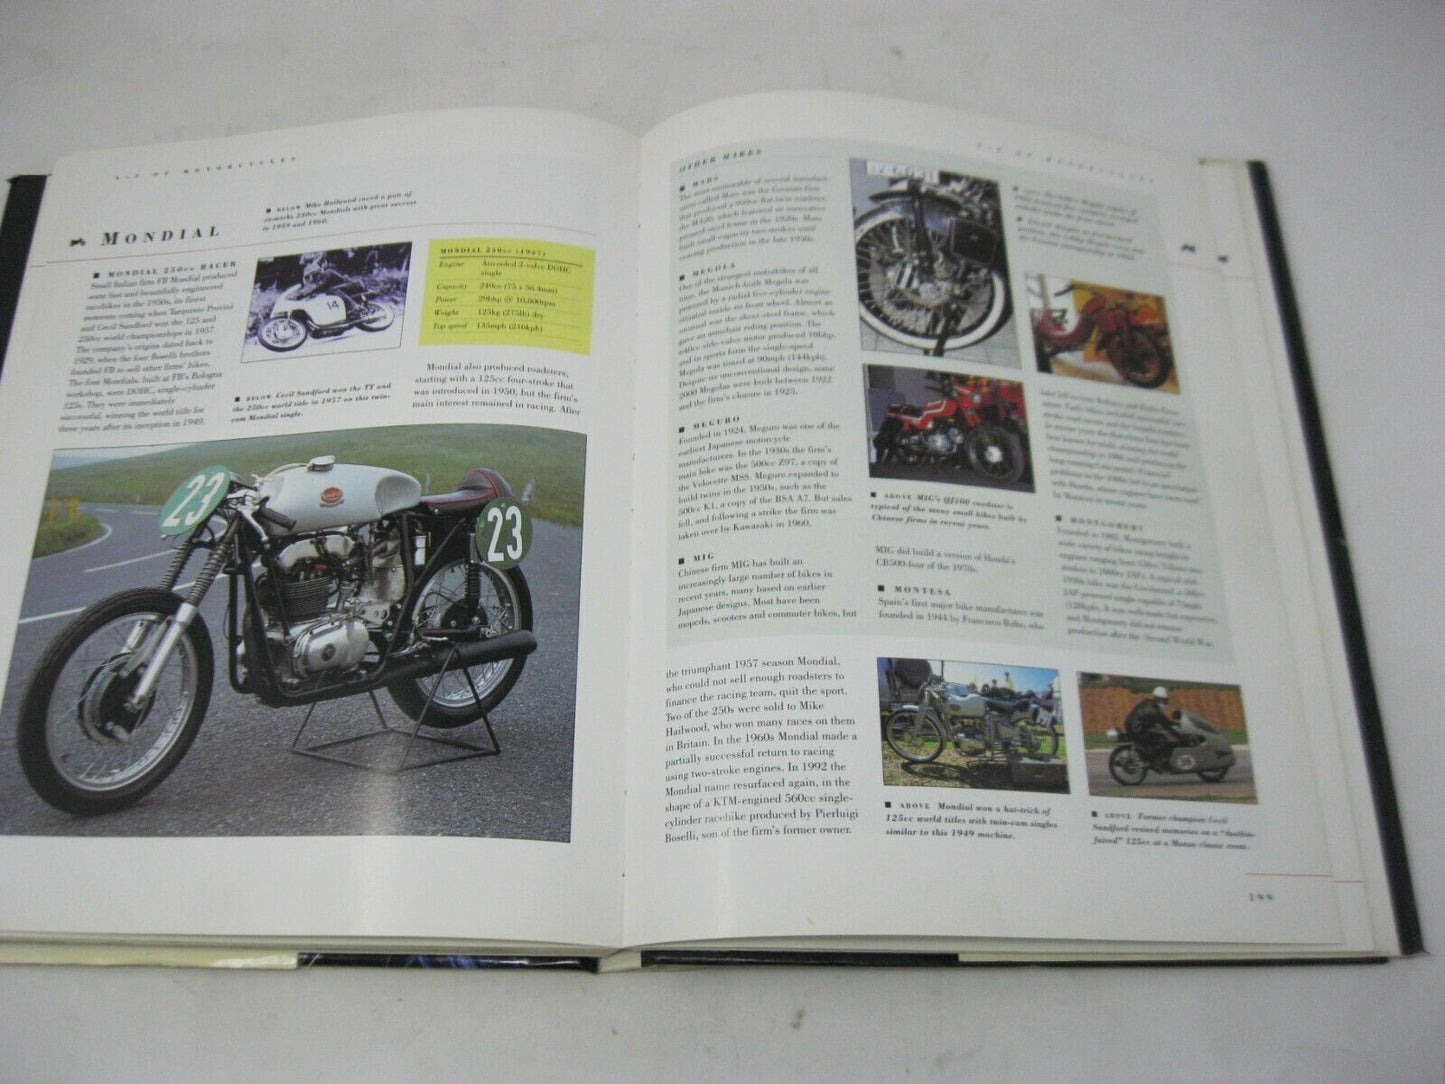 The Encyclopedia of Motorcycles by Roland Brown